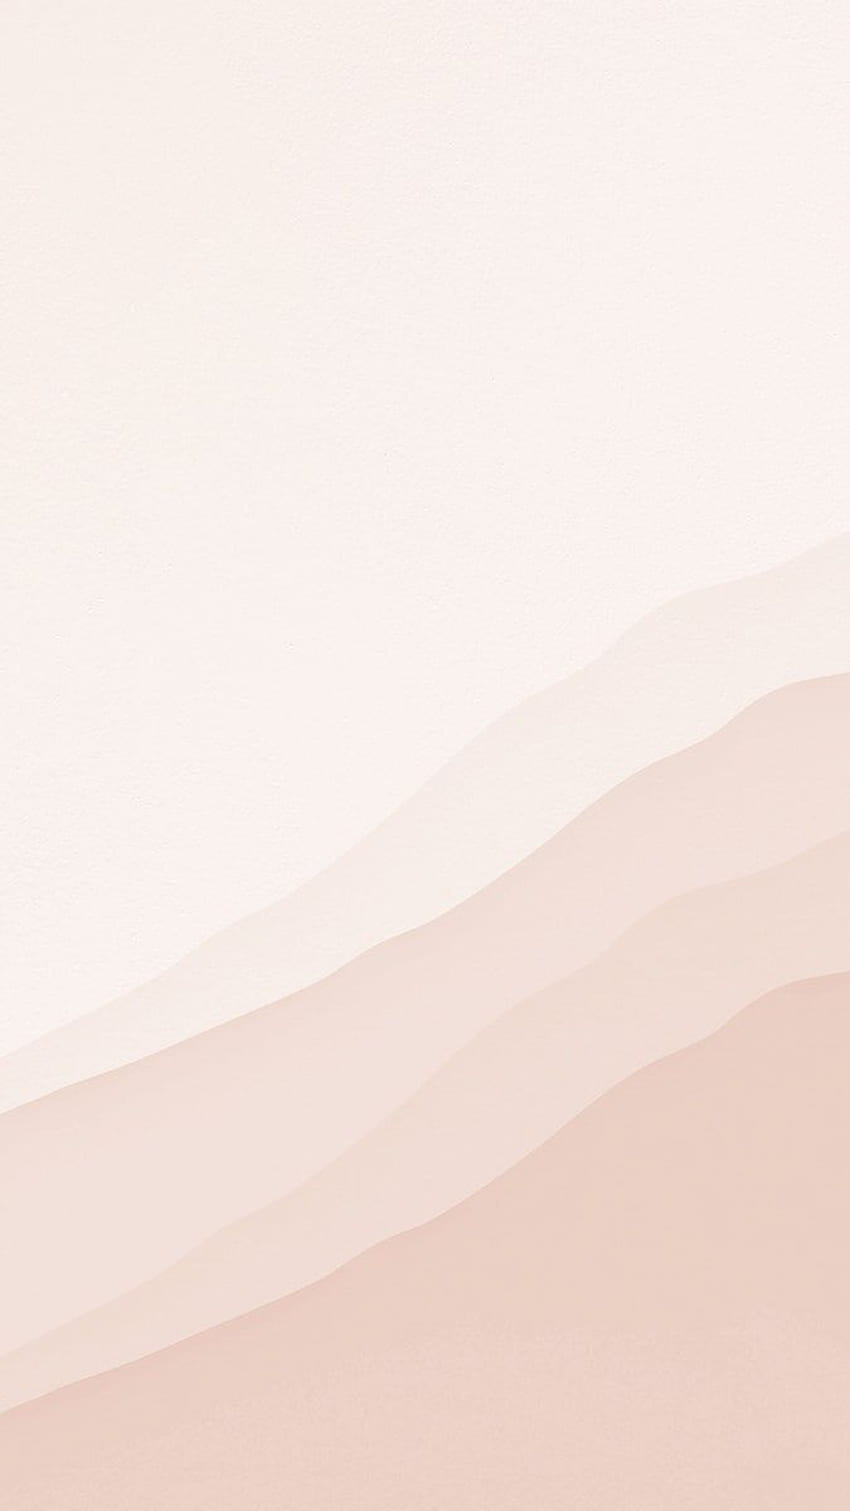 Cream Background Pictures  Download Free Images on Unsplash